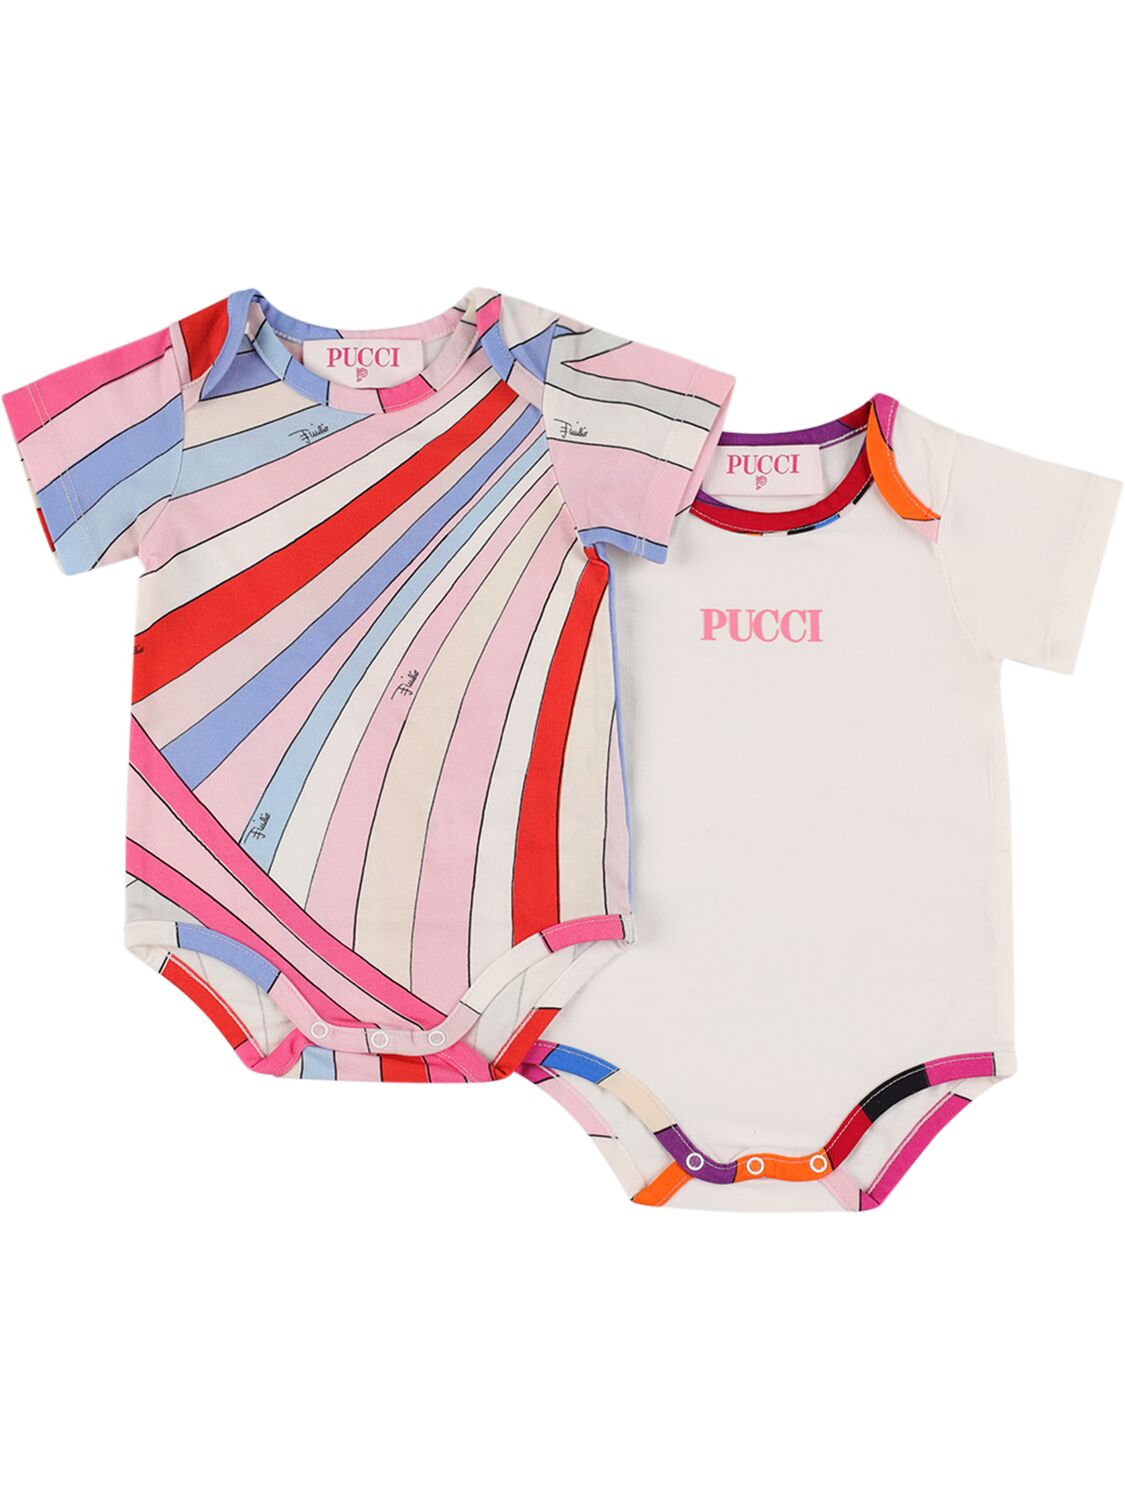 Pucci Babies' Set Of 2 Printed Cotton Jersey Bodysuits In Ivory